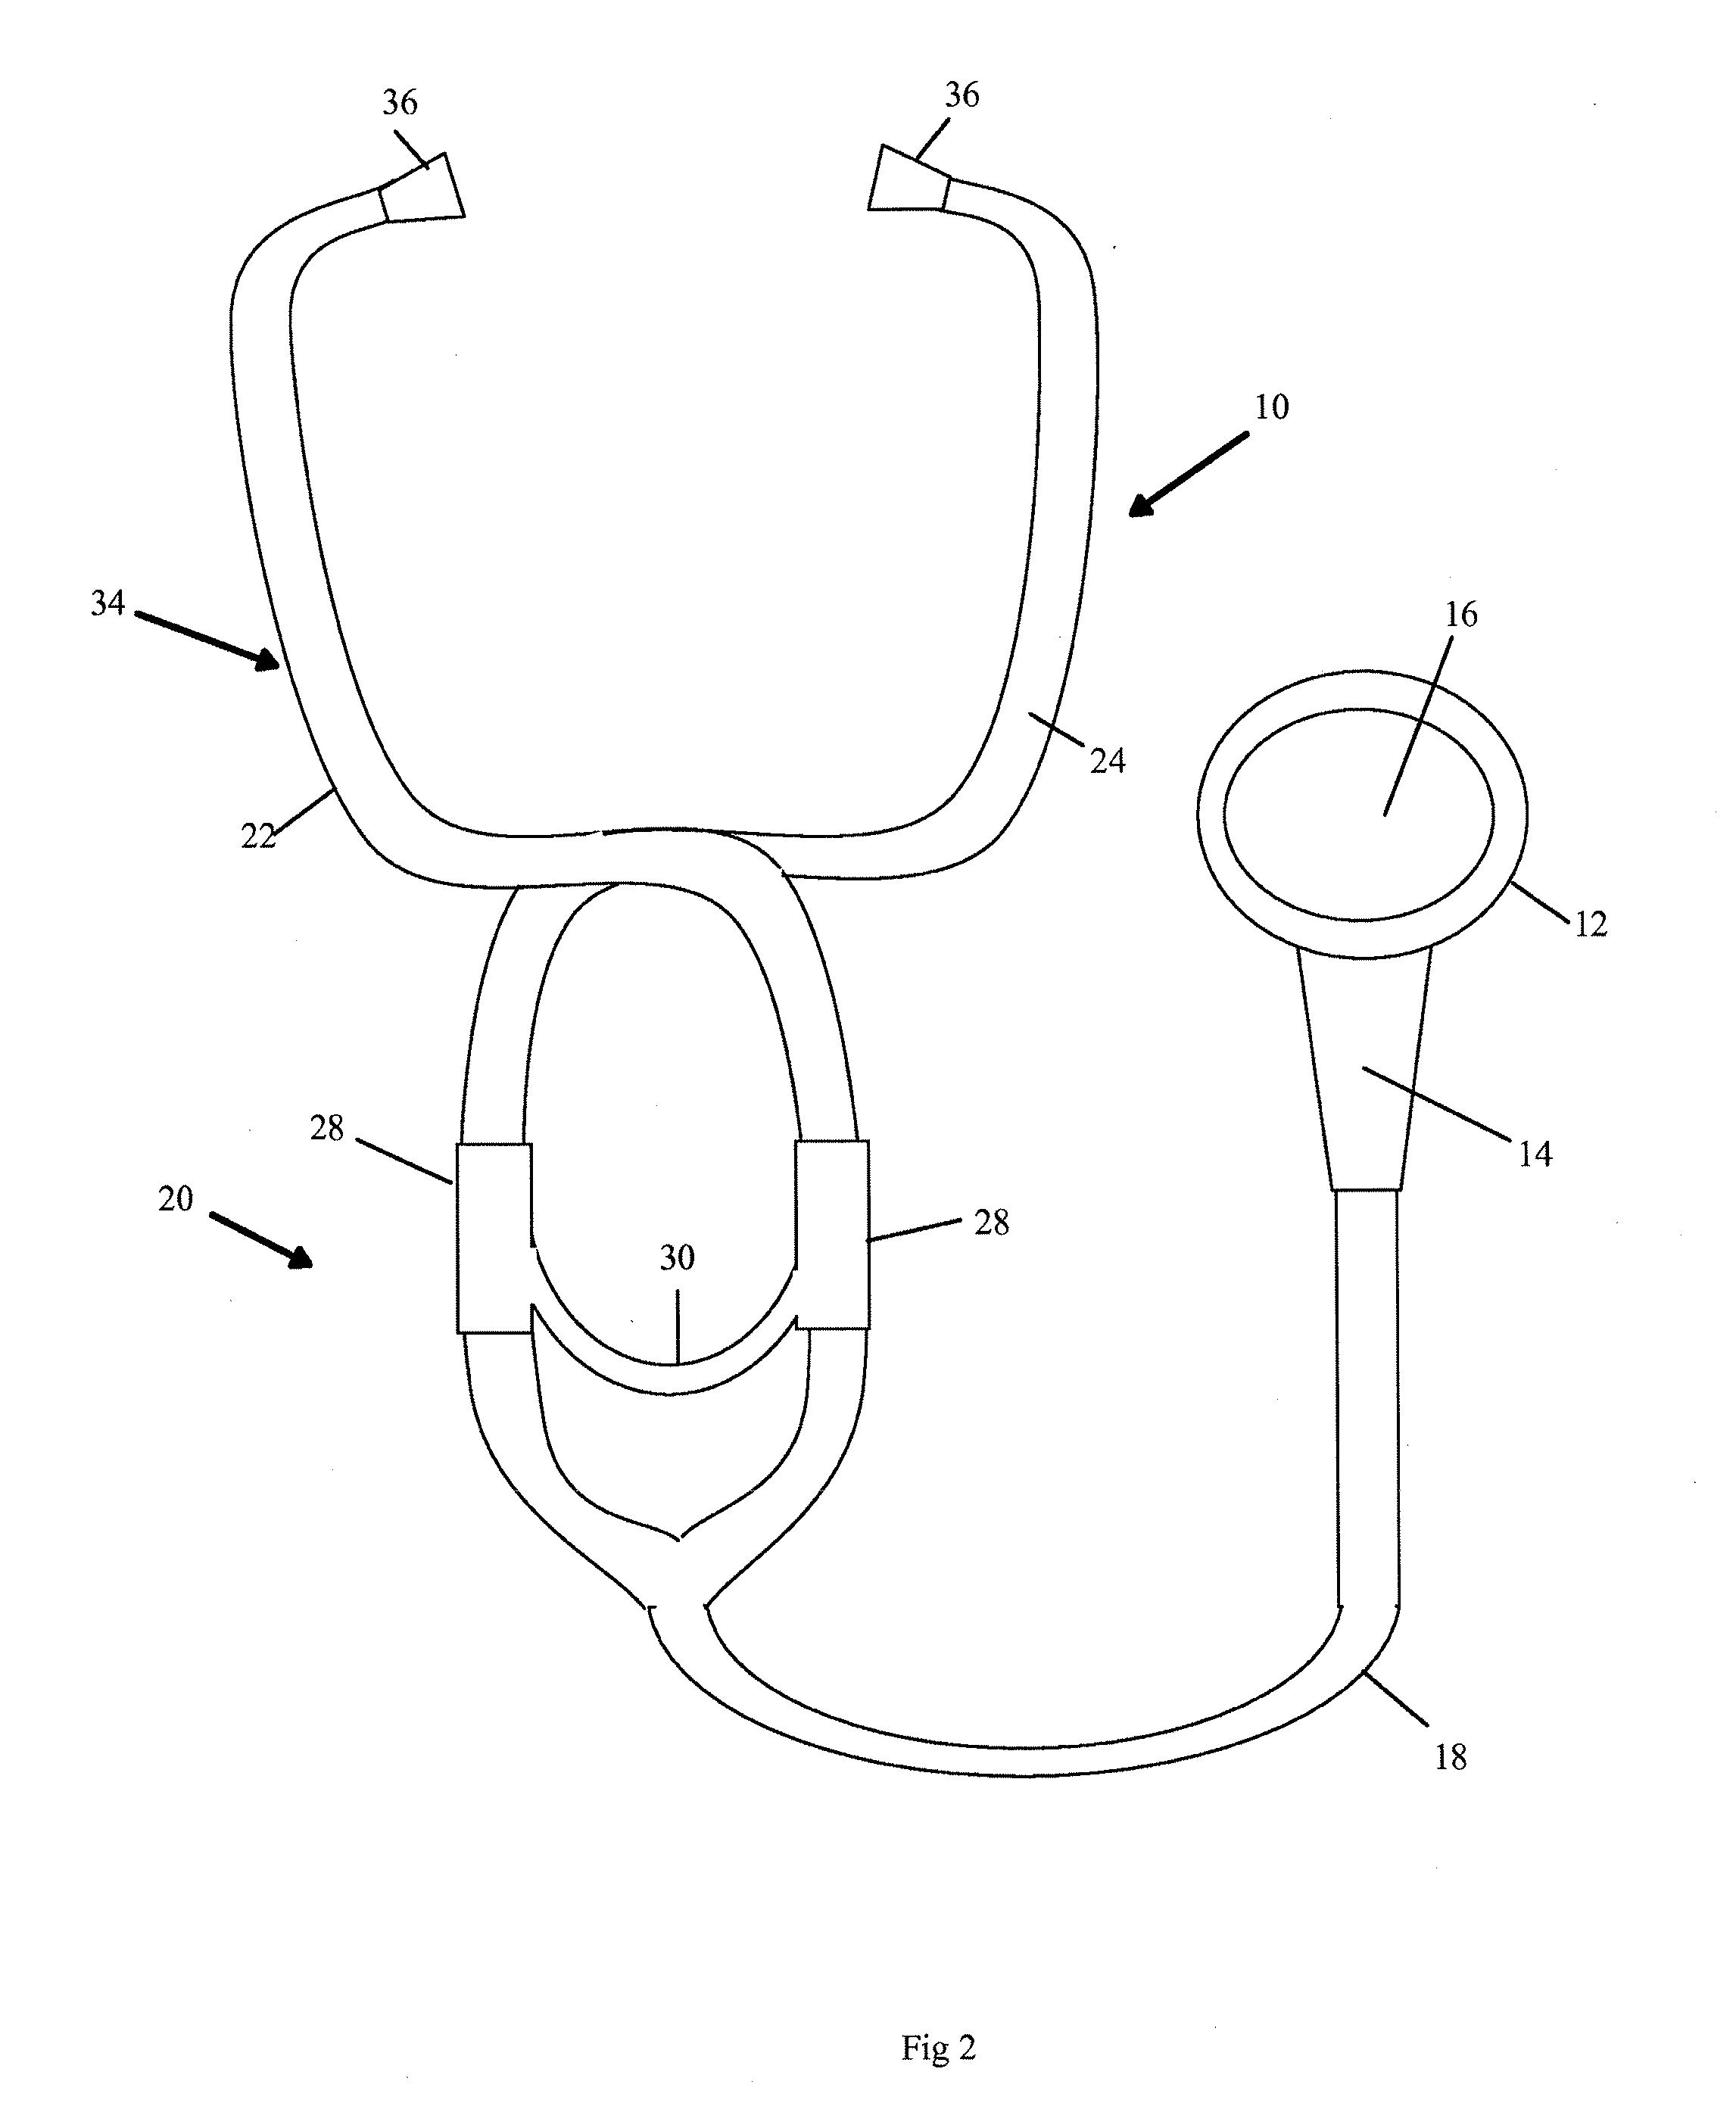 Stethoscope Having An Elliptical Headpiece And Amplified Earpieces